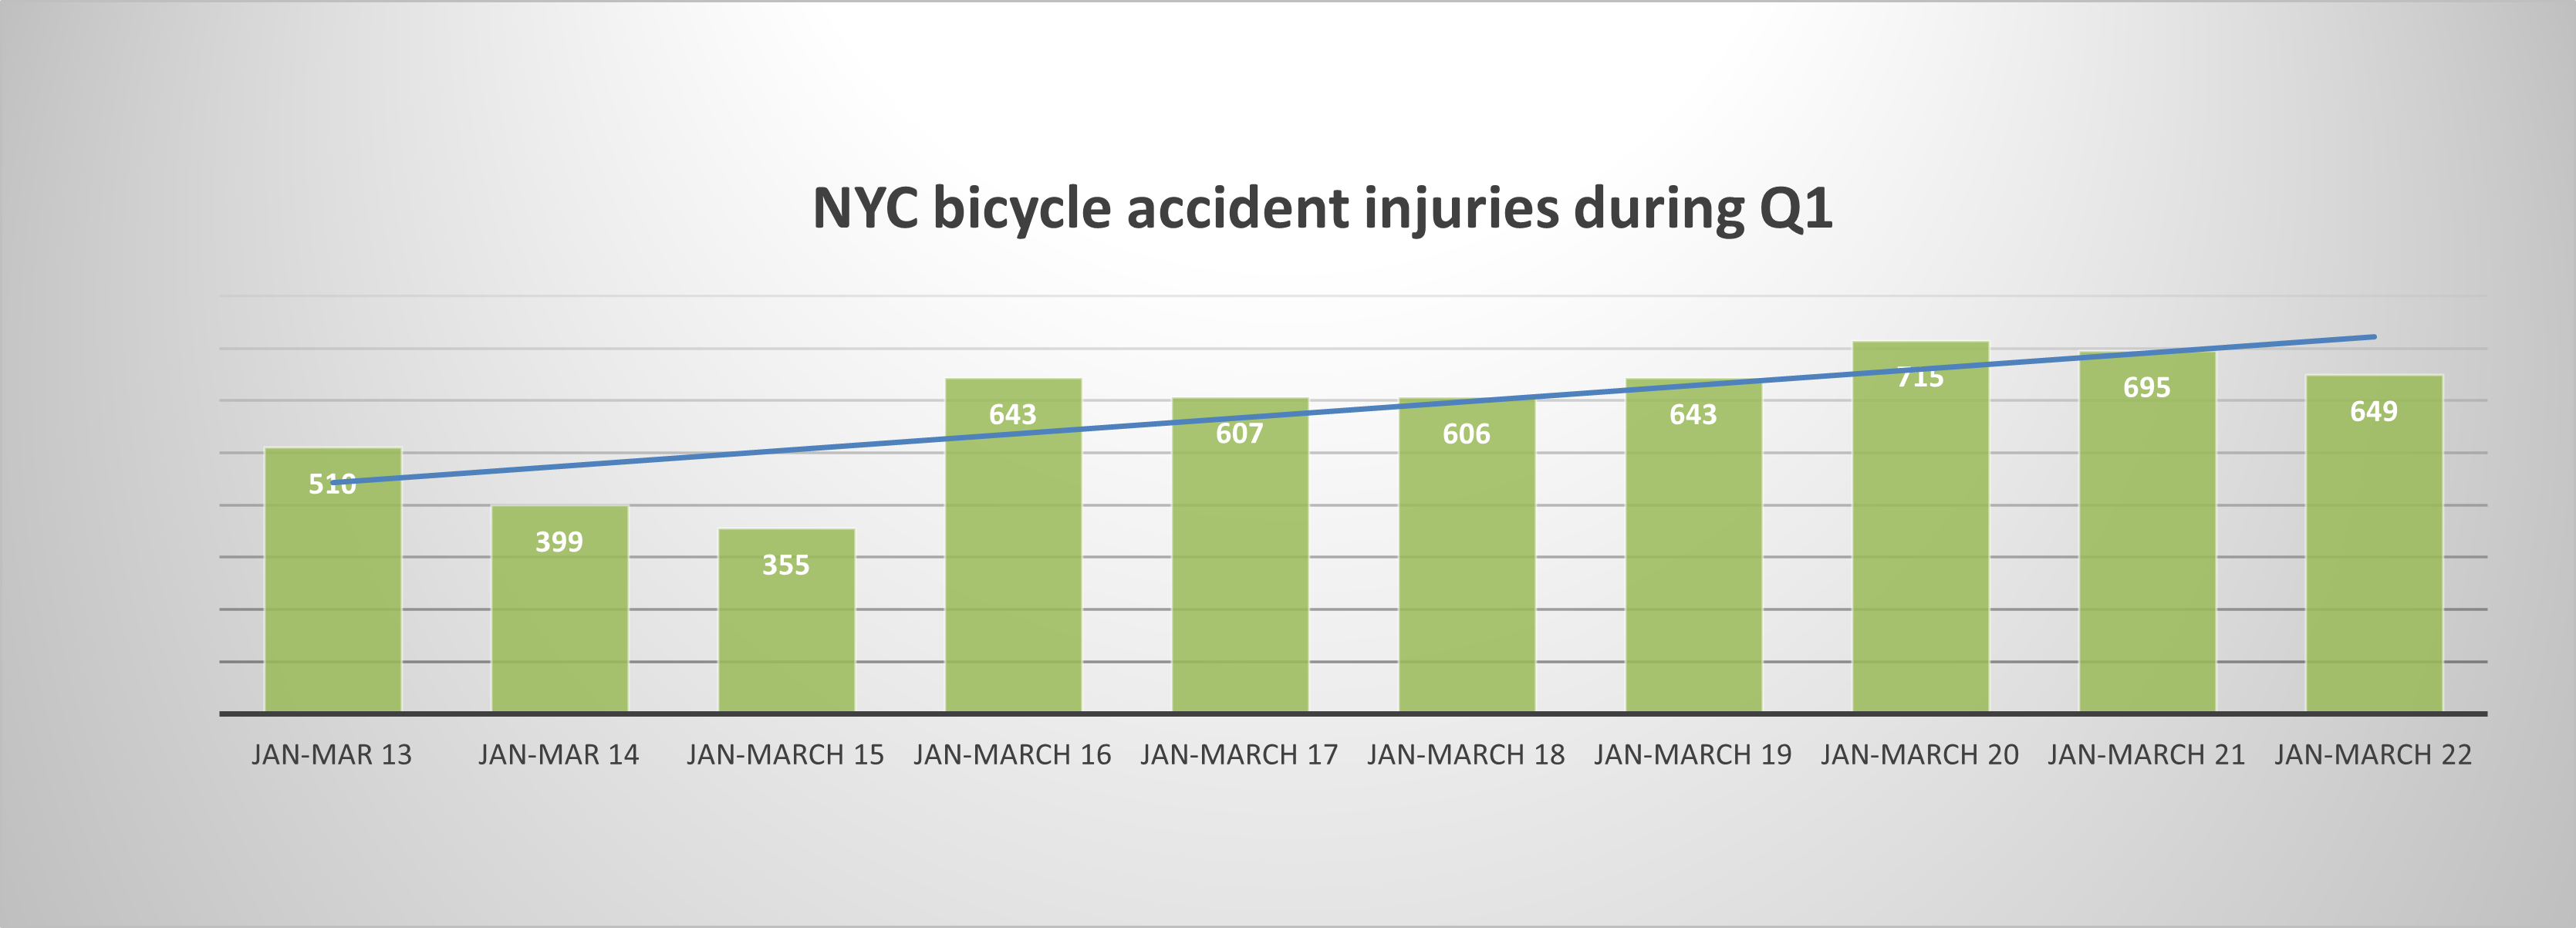 NYC bicycle accident injuries Q1 22